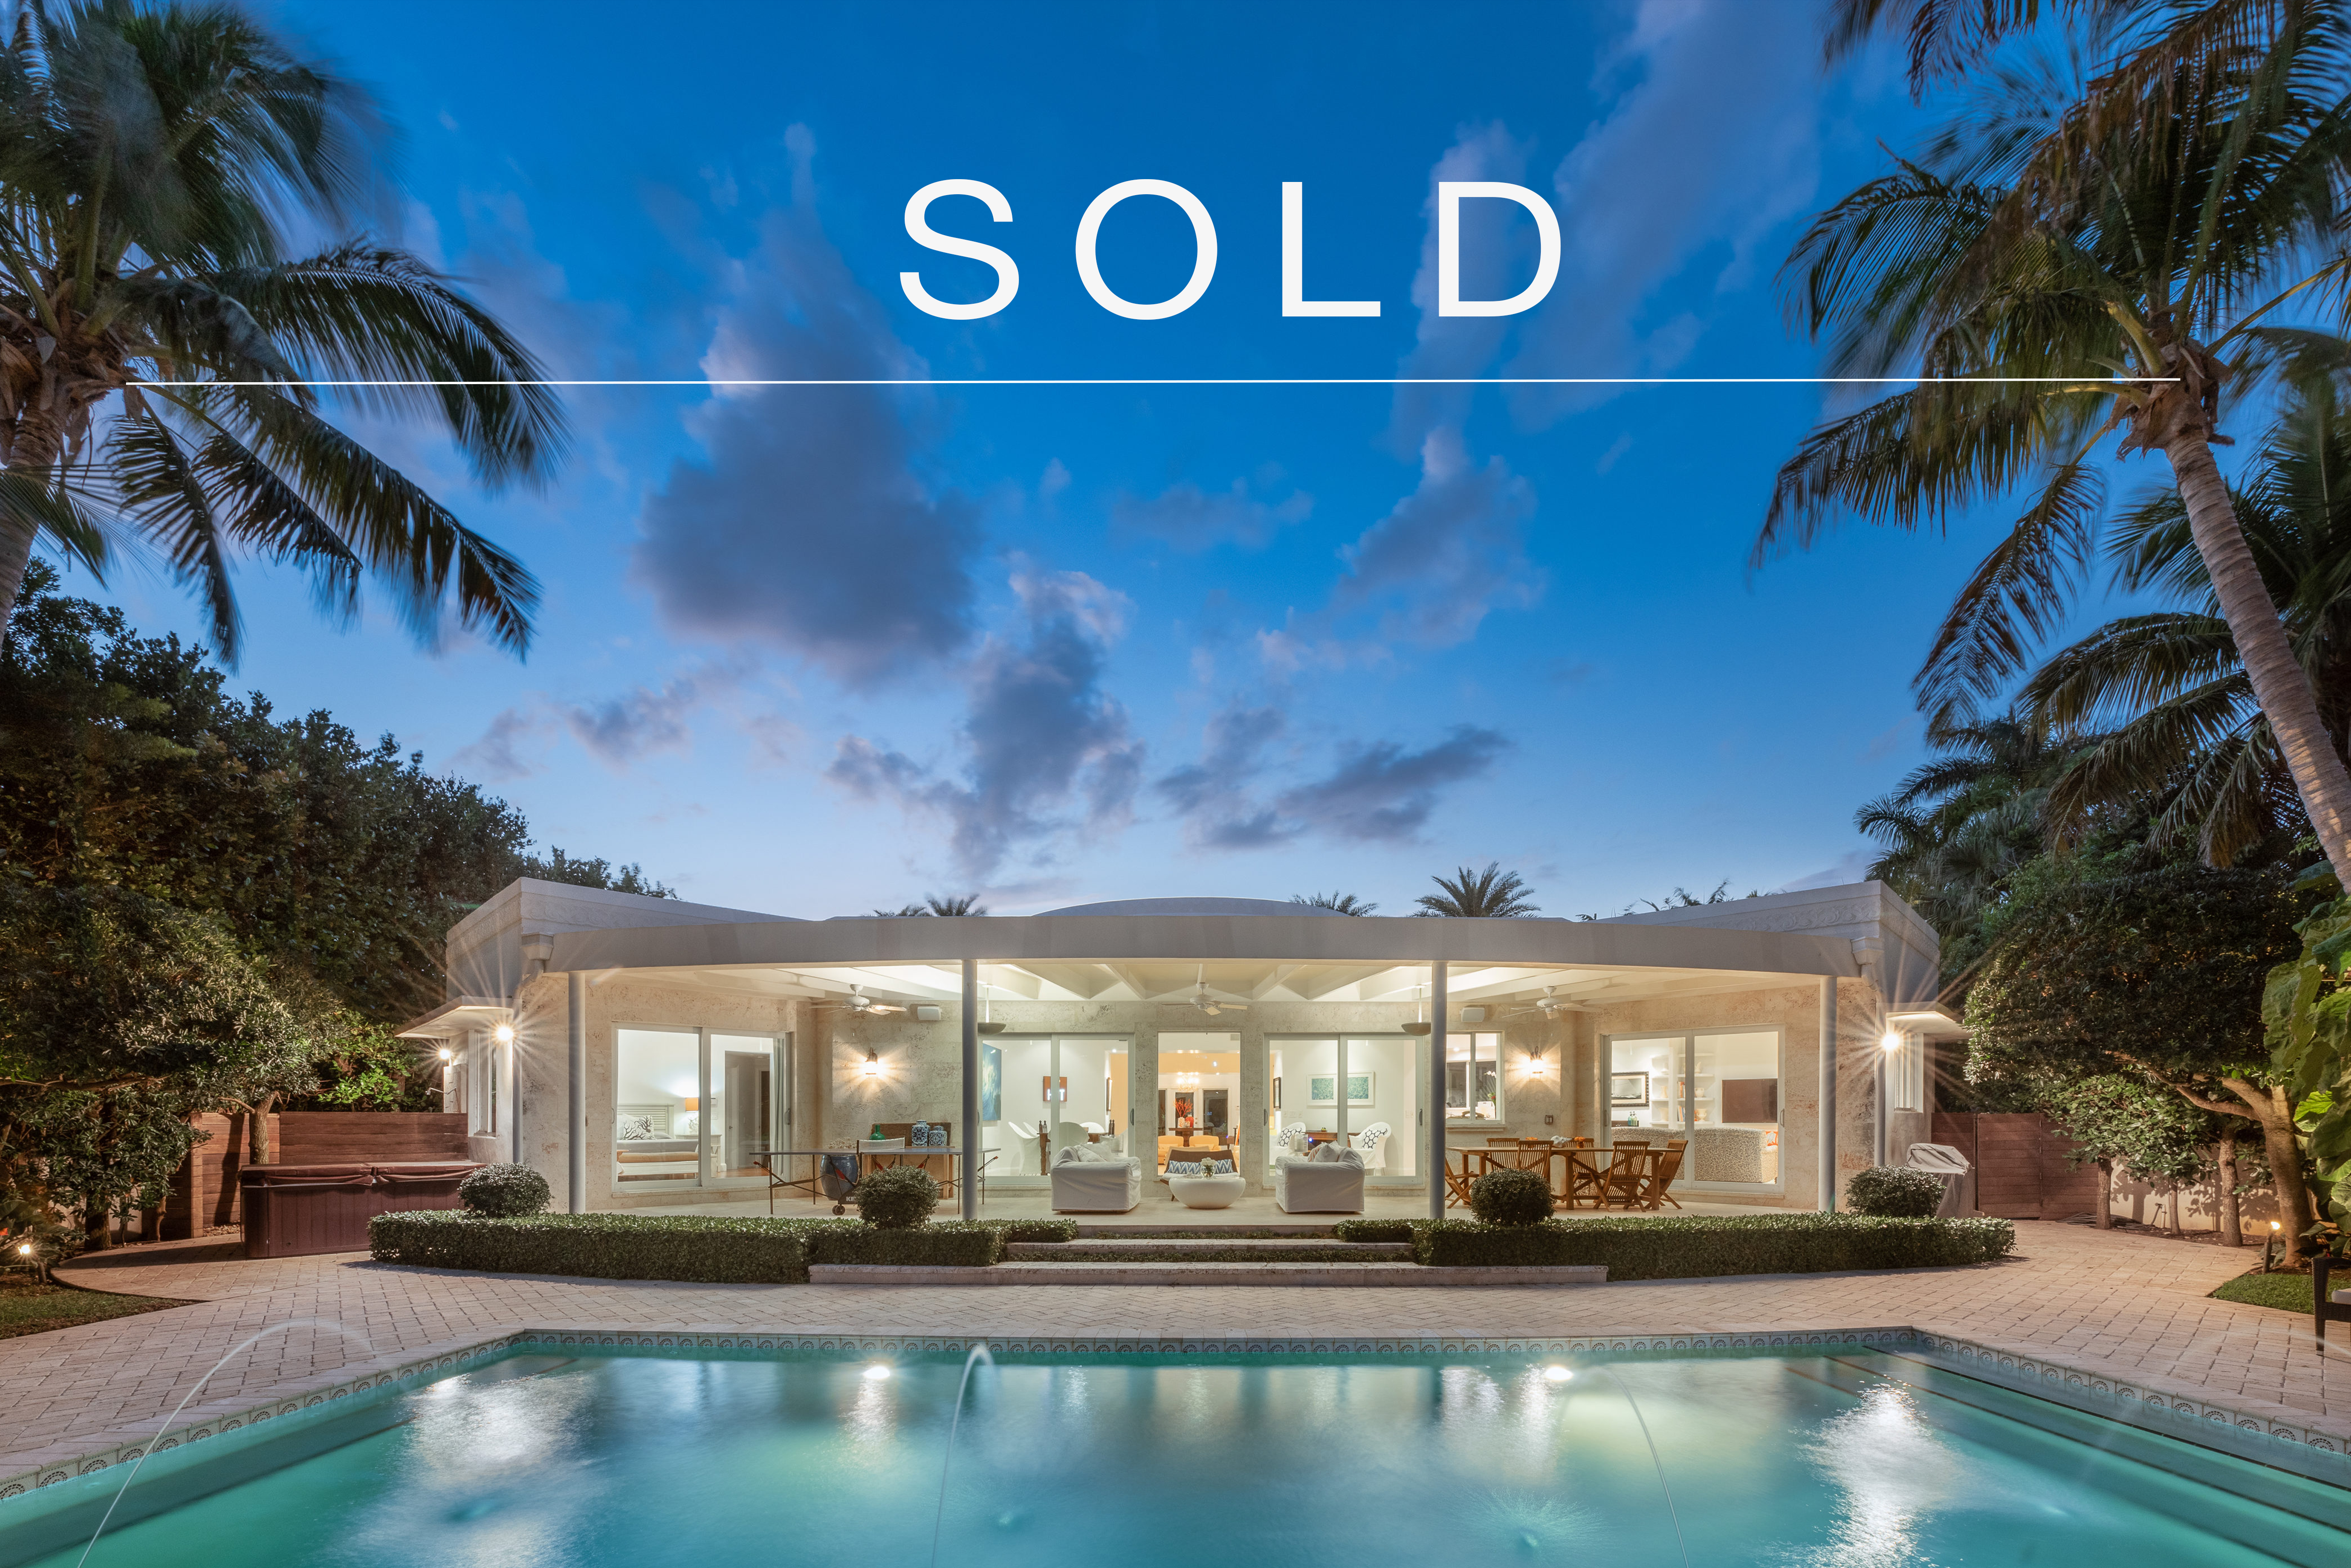 Sold Luxury Home in South Beach by Top Realtor Nelson Gonzalez – 2515 Flamingo Drive